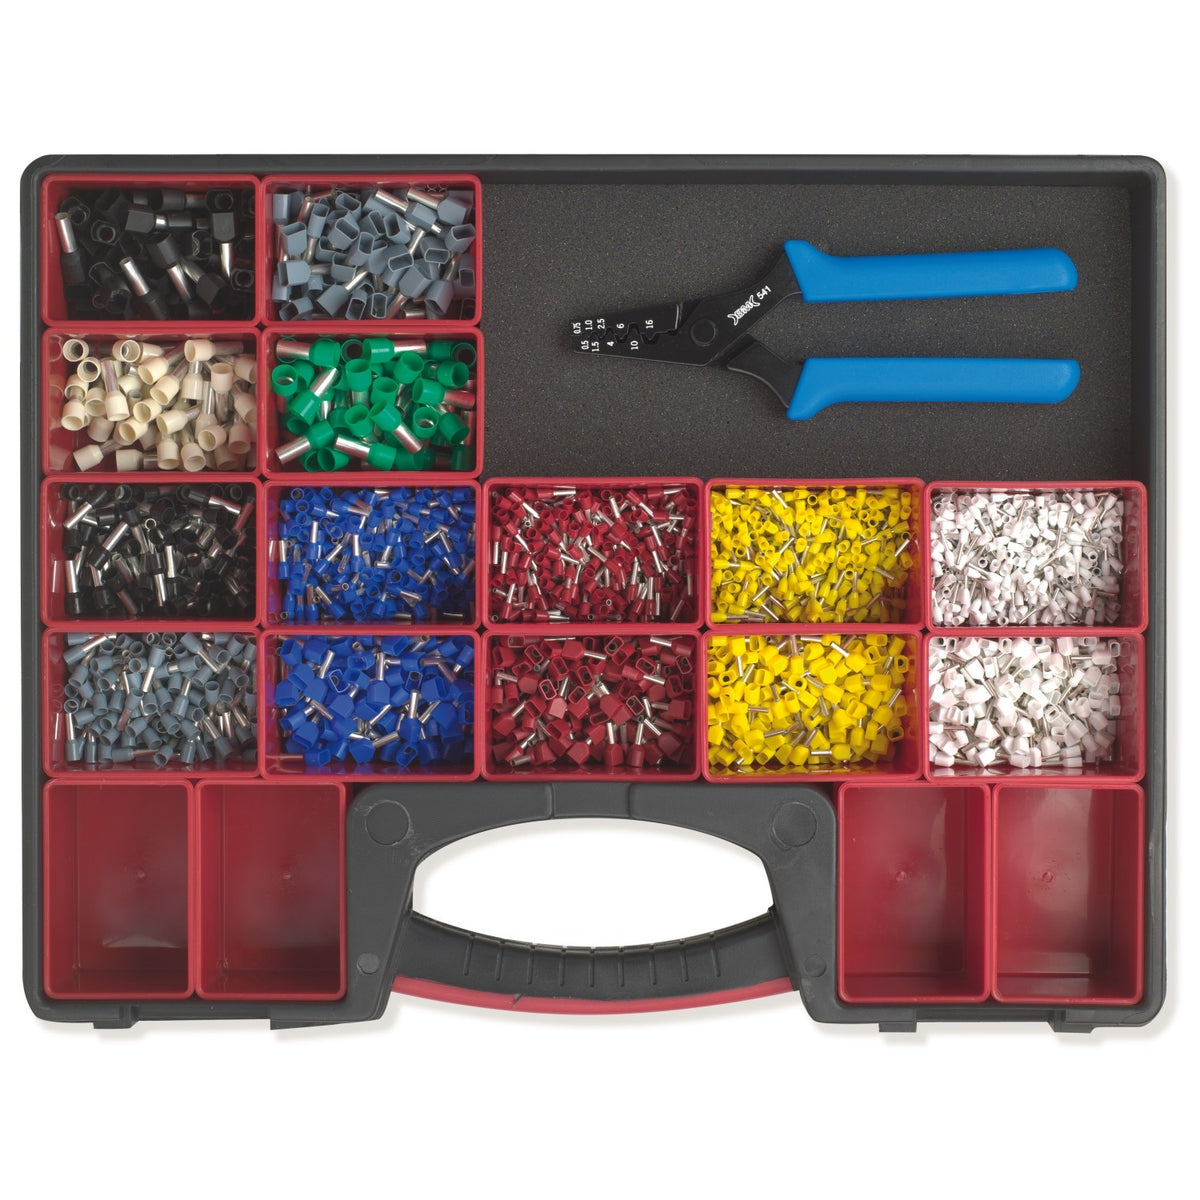 Assortment of socket terminal lugs in a red box with pliers